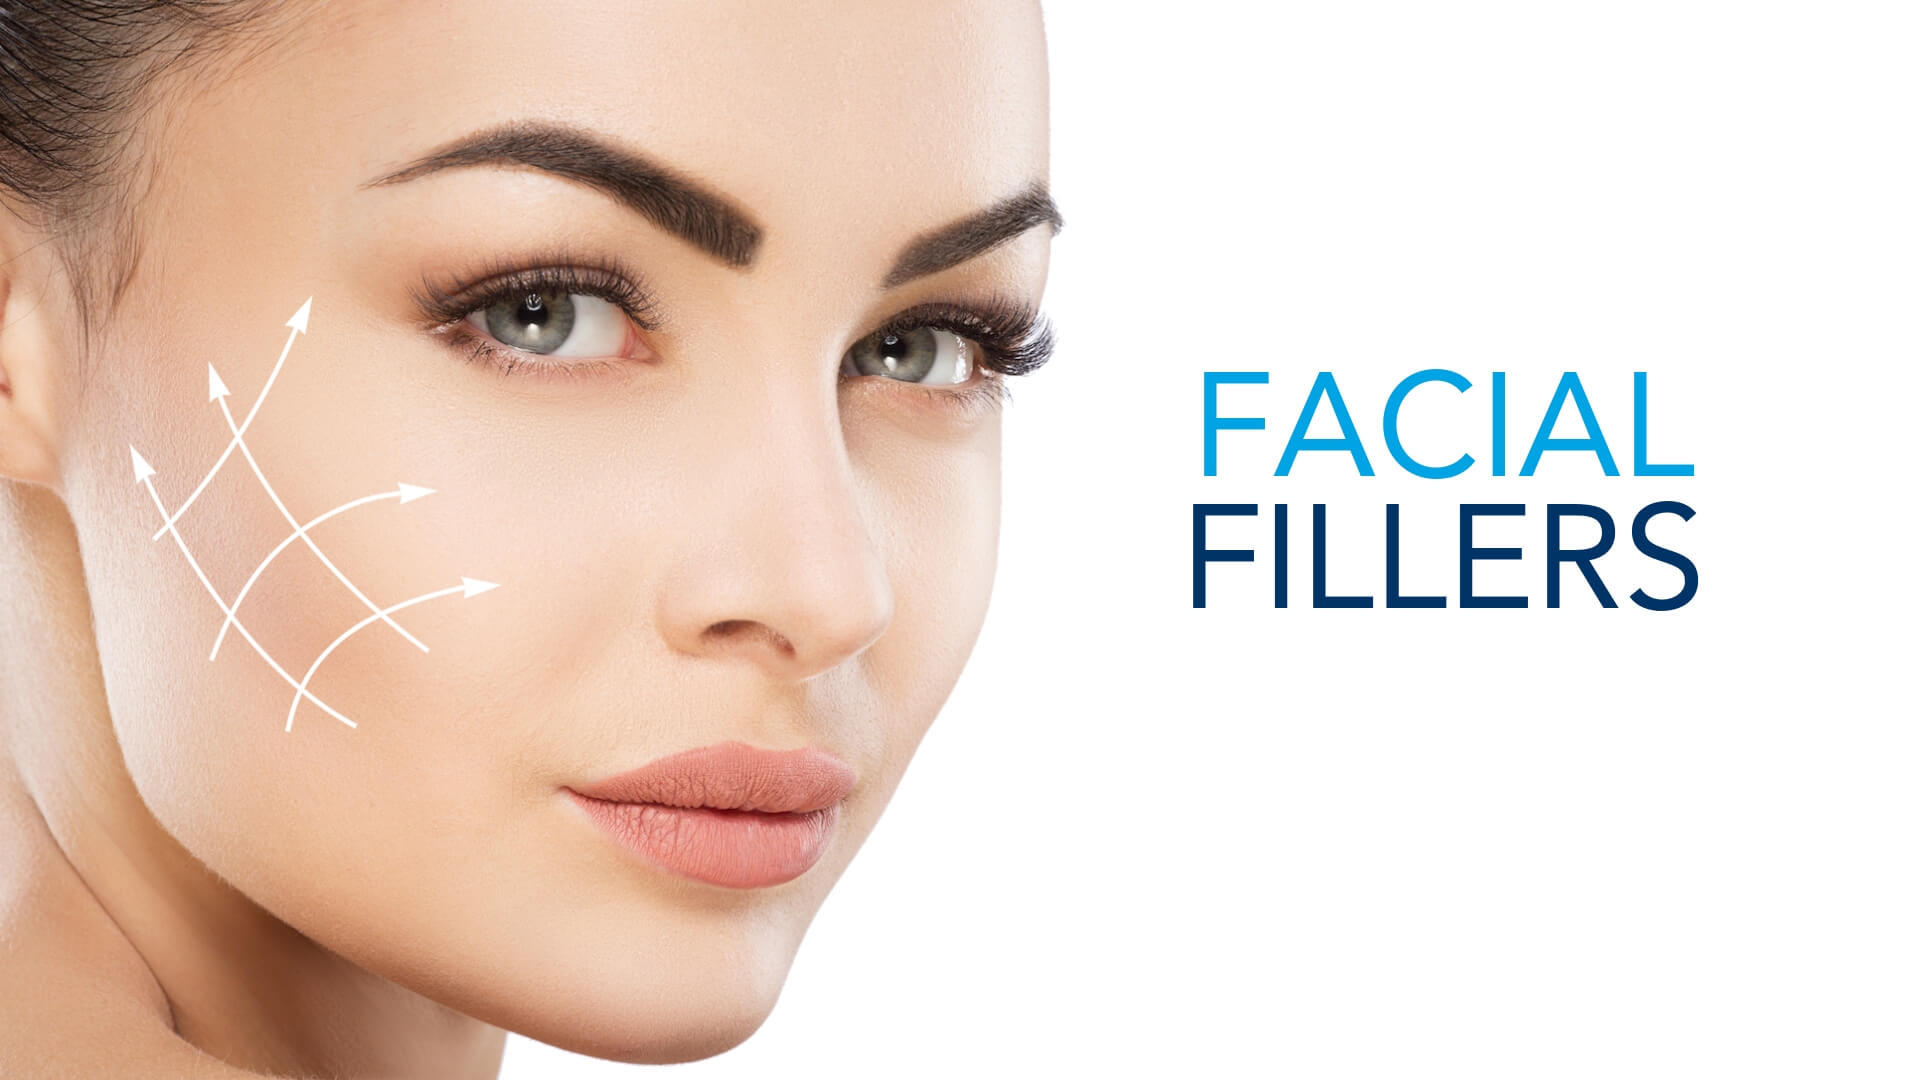 vein-and-cosmetics-facial-fillers